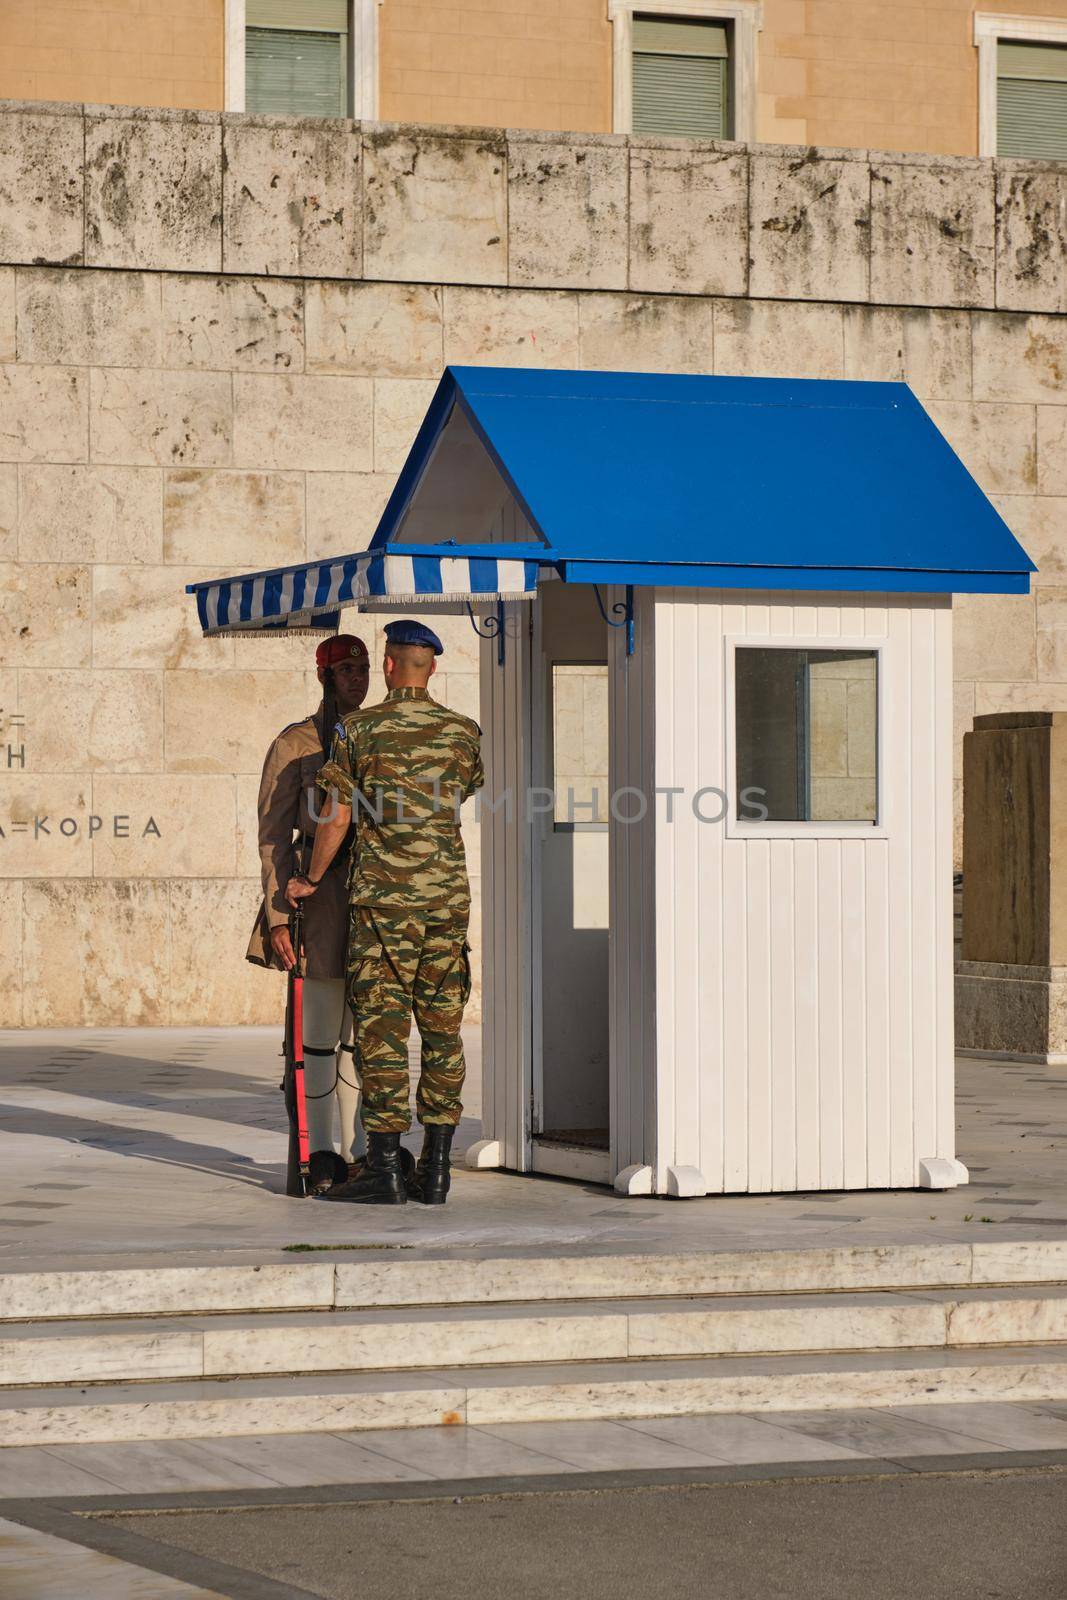 ATHENS, GREECE - MAY 20, 2010: Supervising Corporal of the Change fixes presidential ceremonial guard Evzone costume in front of the Monument of the Unknown Soldier near Greek Parliament, Syntagma square, Athenes, Greece